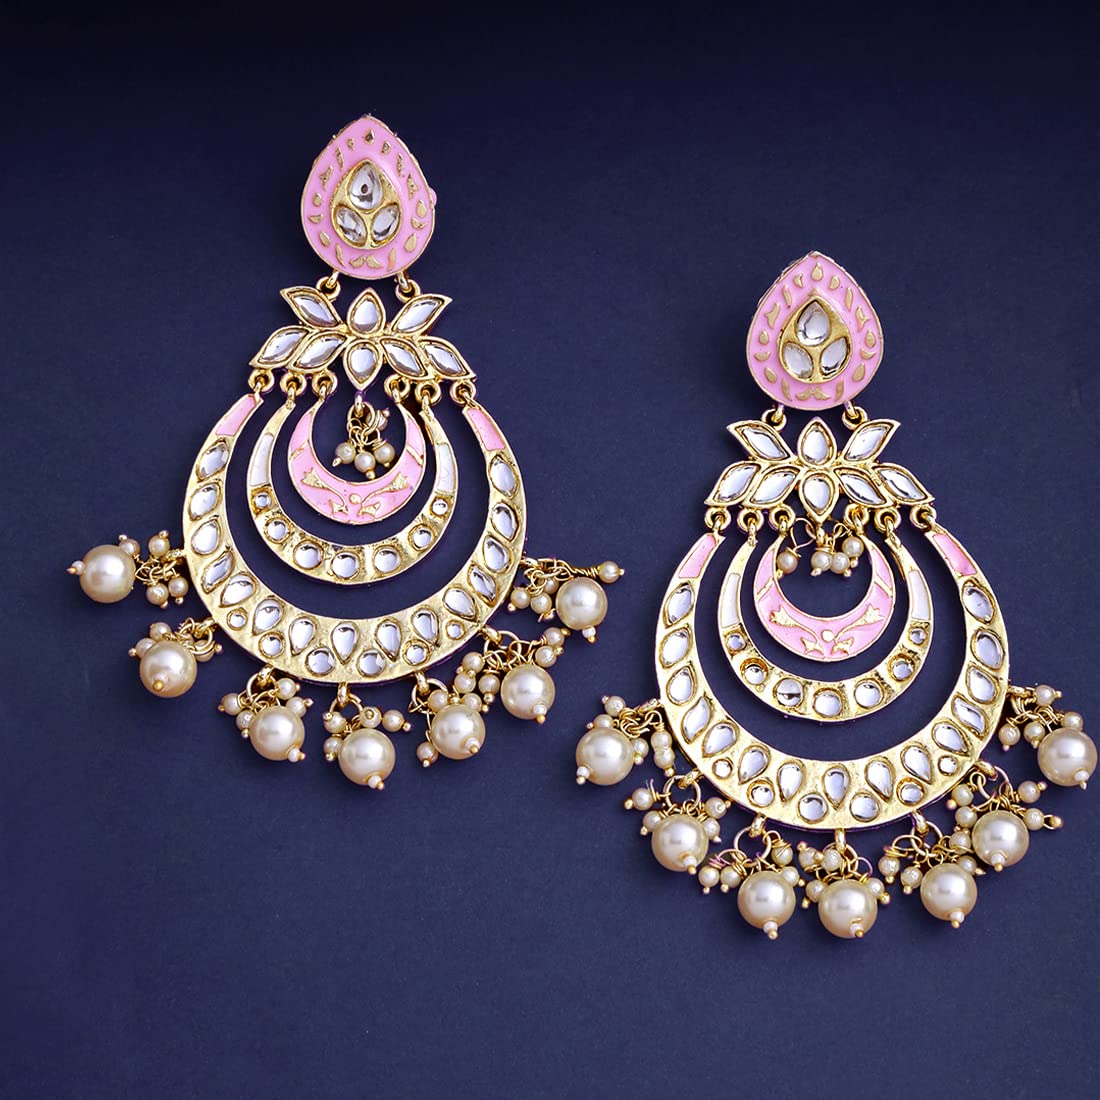 Yellow Chimes Chandbali Earrings for Women Ethnic Gold Plated Traditional Meenakari Floral Long Chand bali Earrings for Women and Girls